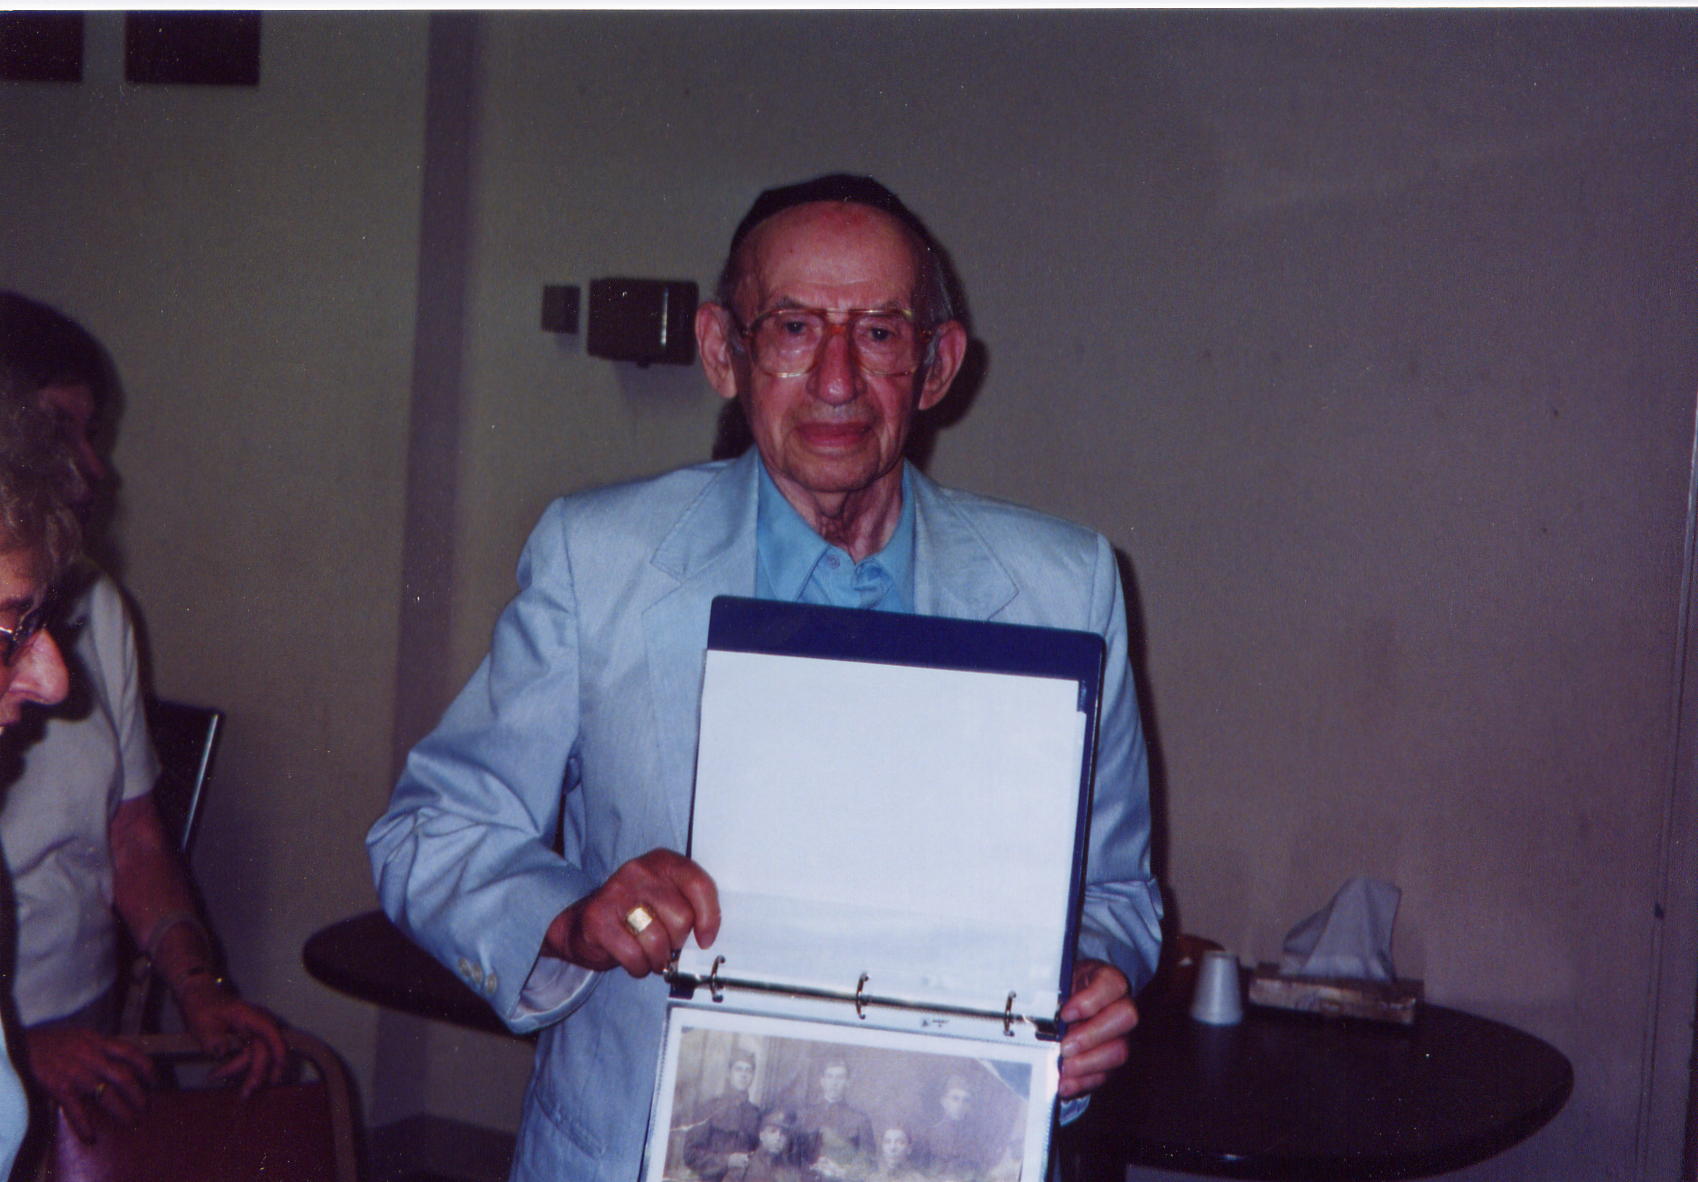 Paul Gelb at age 97 [son of Shia Gelb and Fayge Weiss].